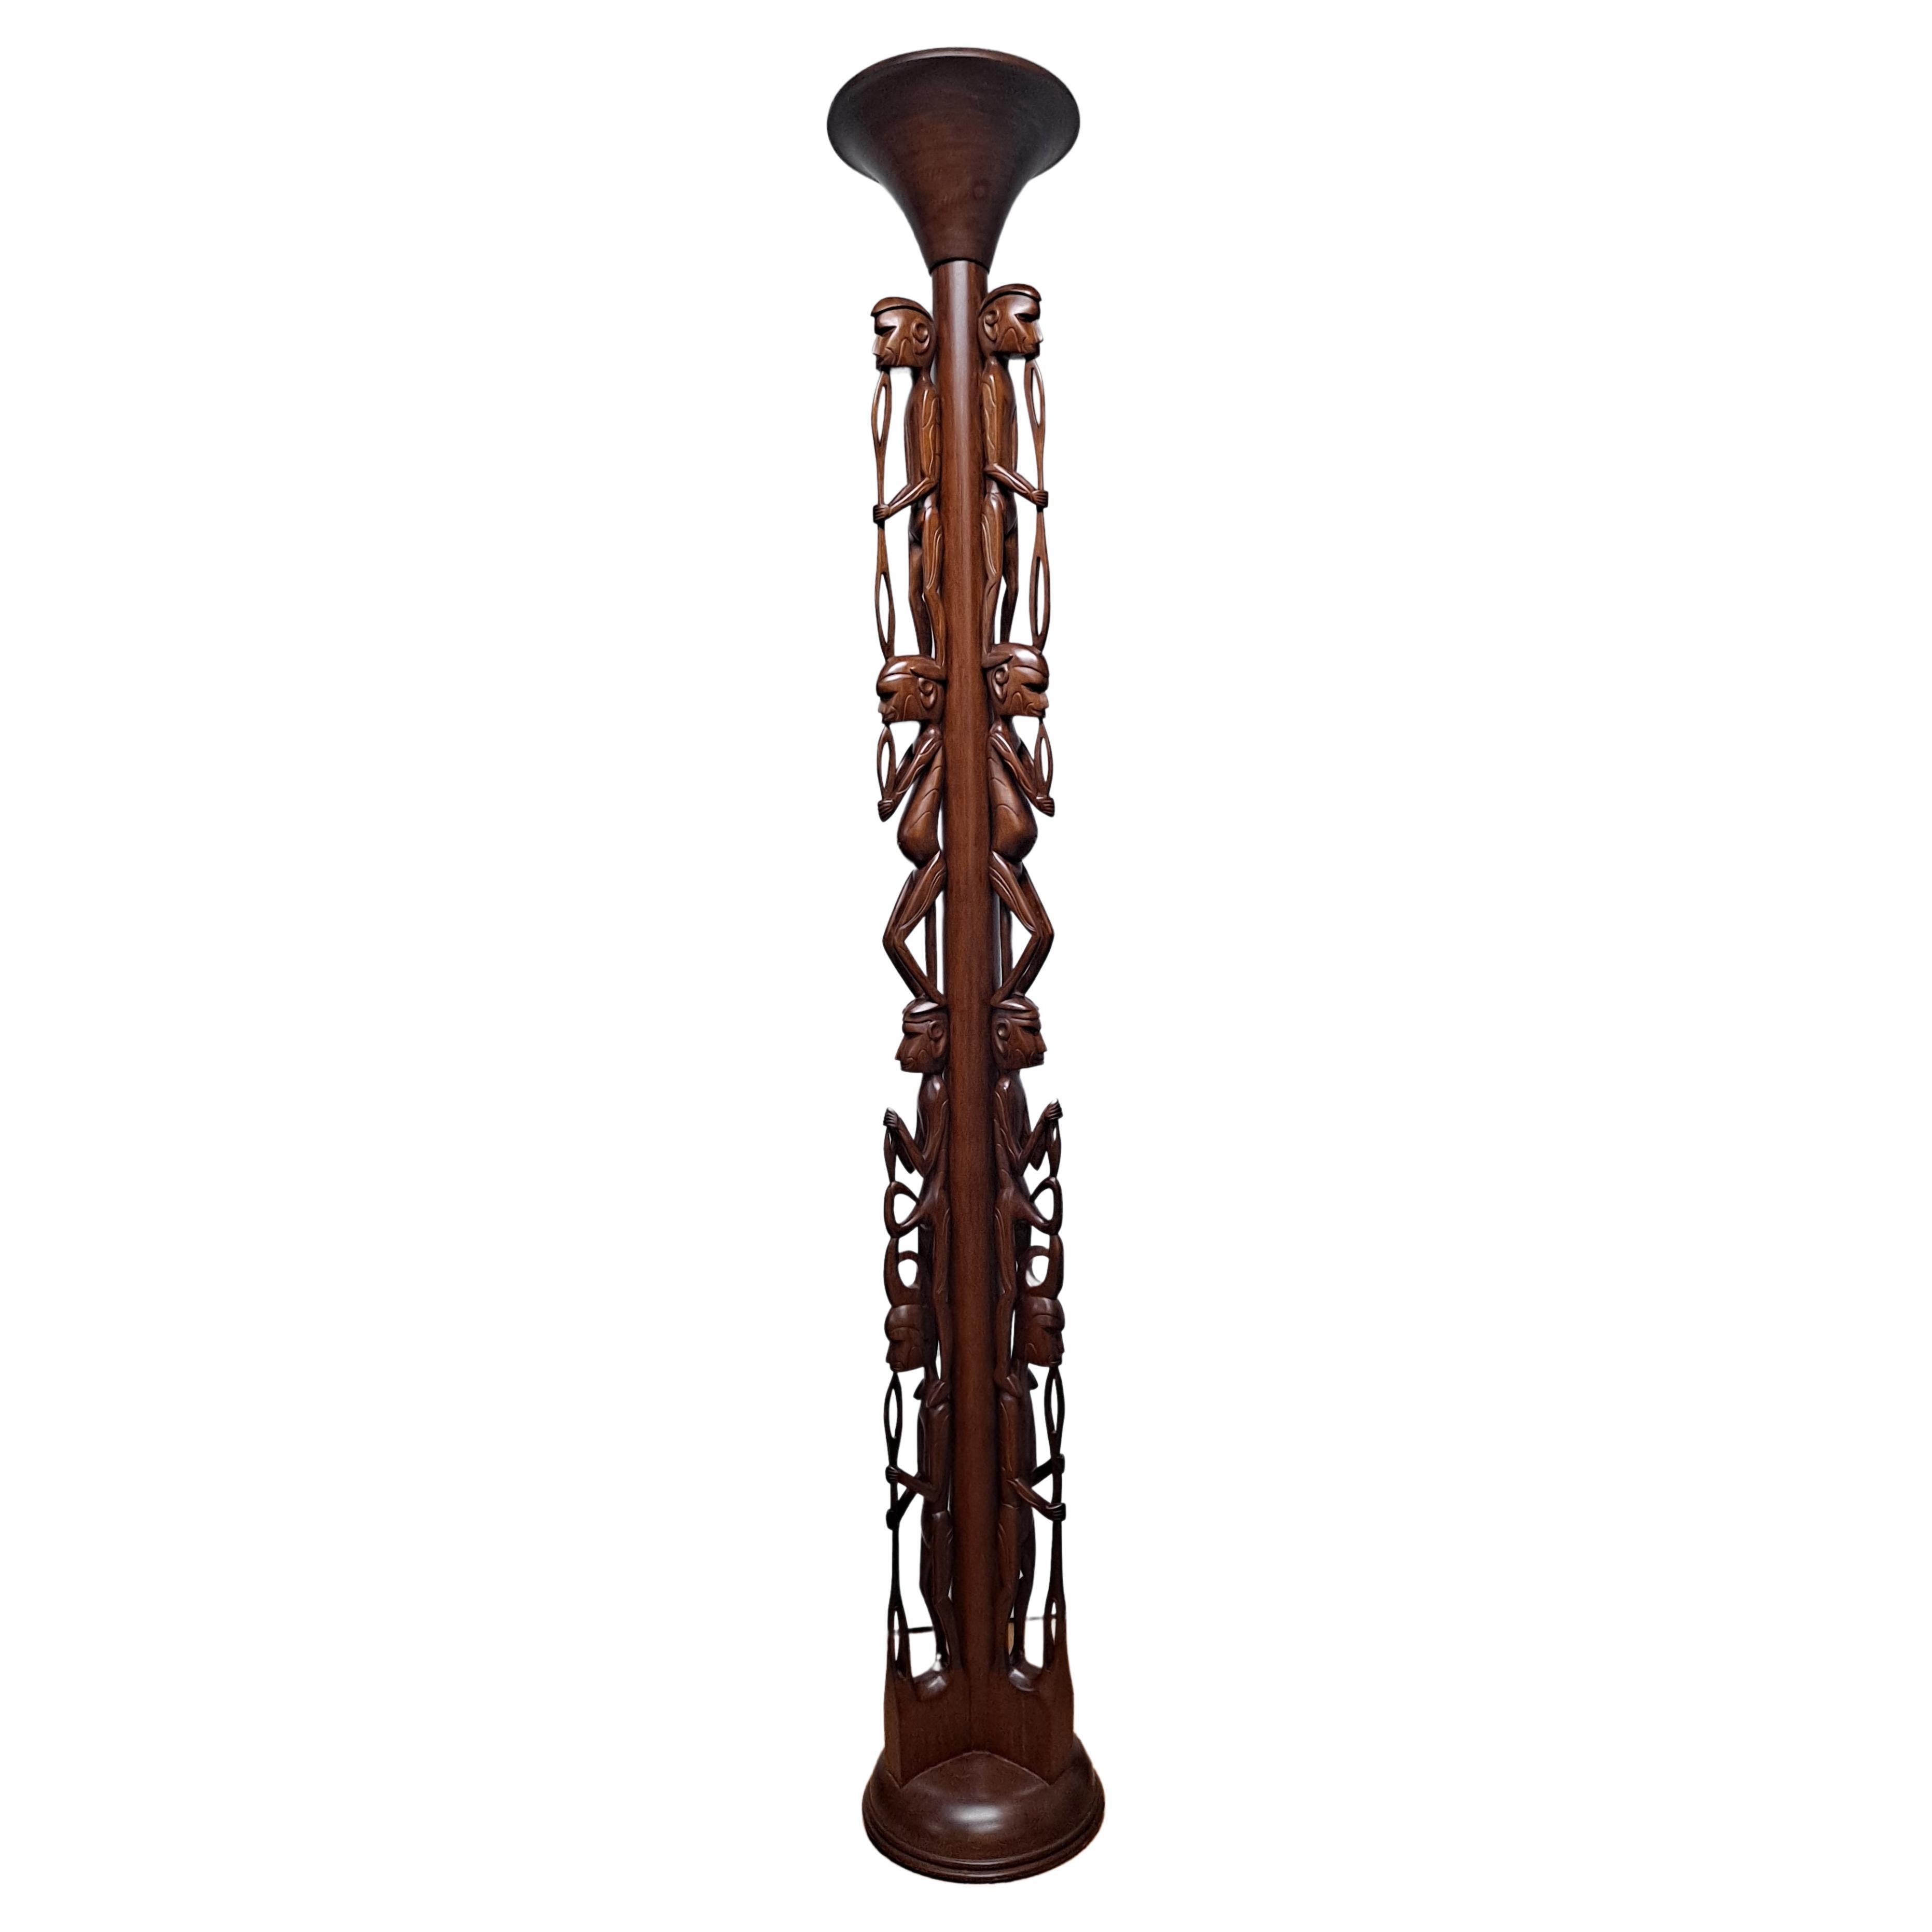 Beautifully hand carved wooden figure floor lamp